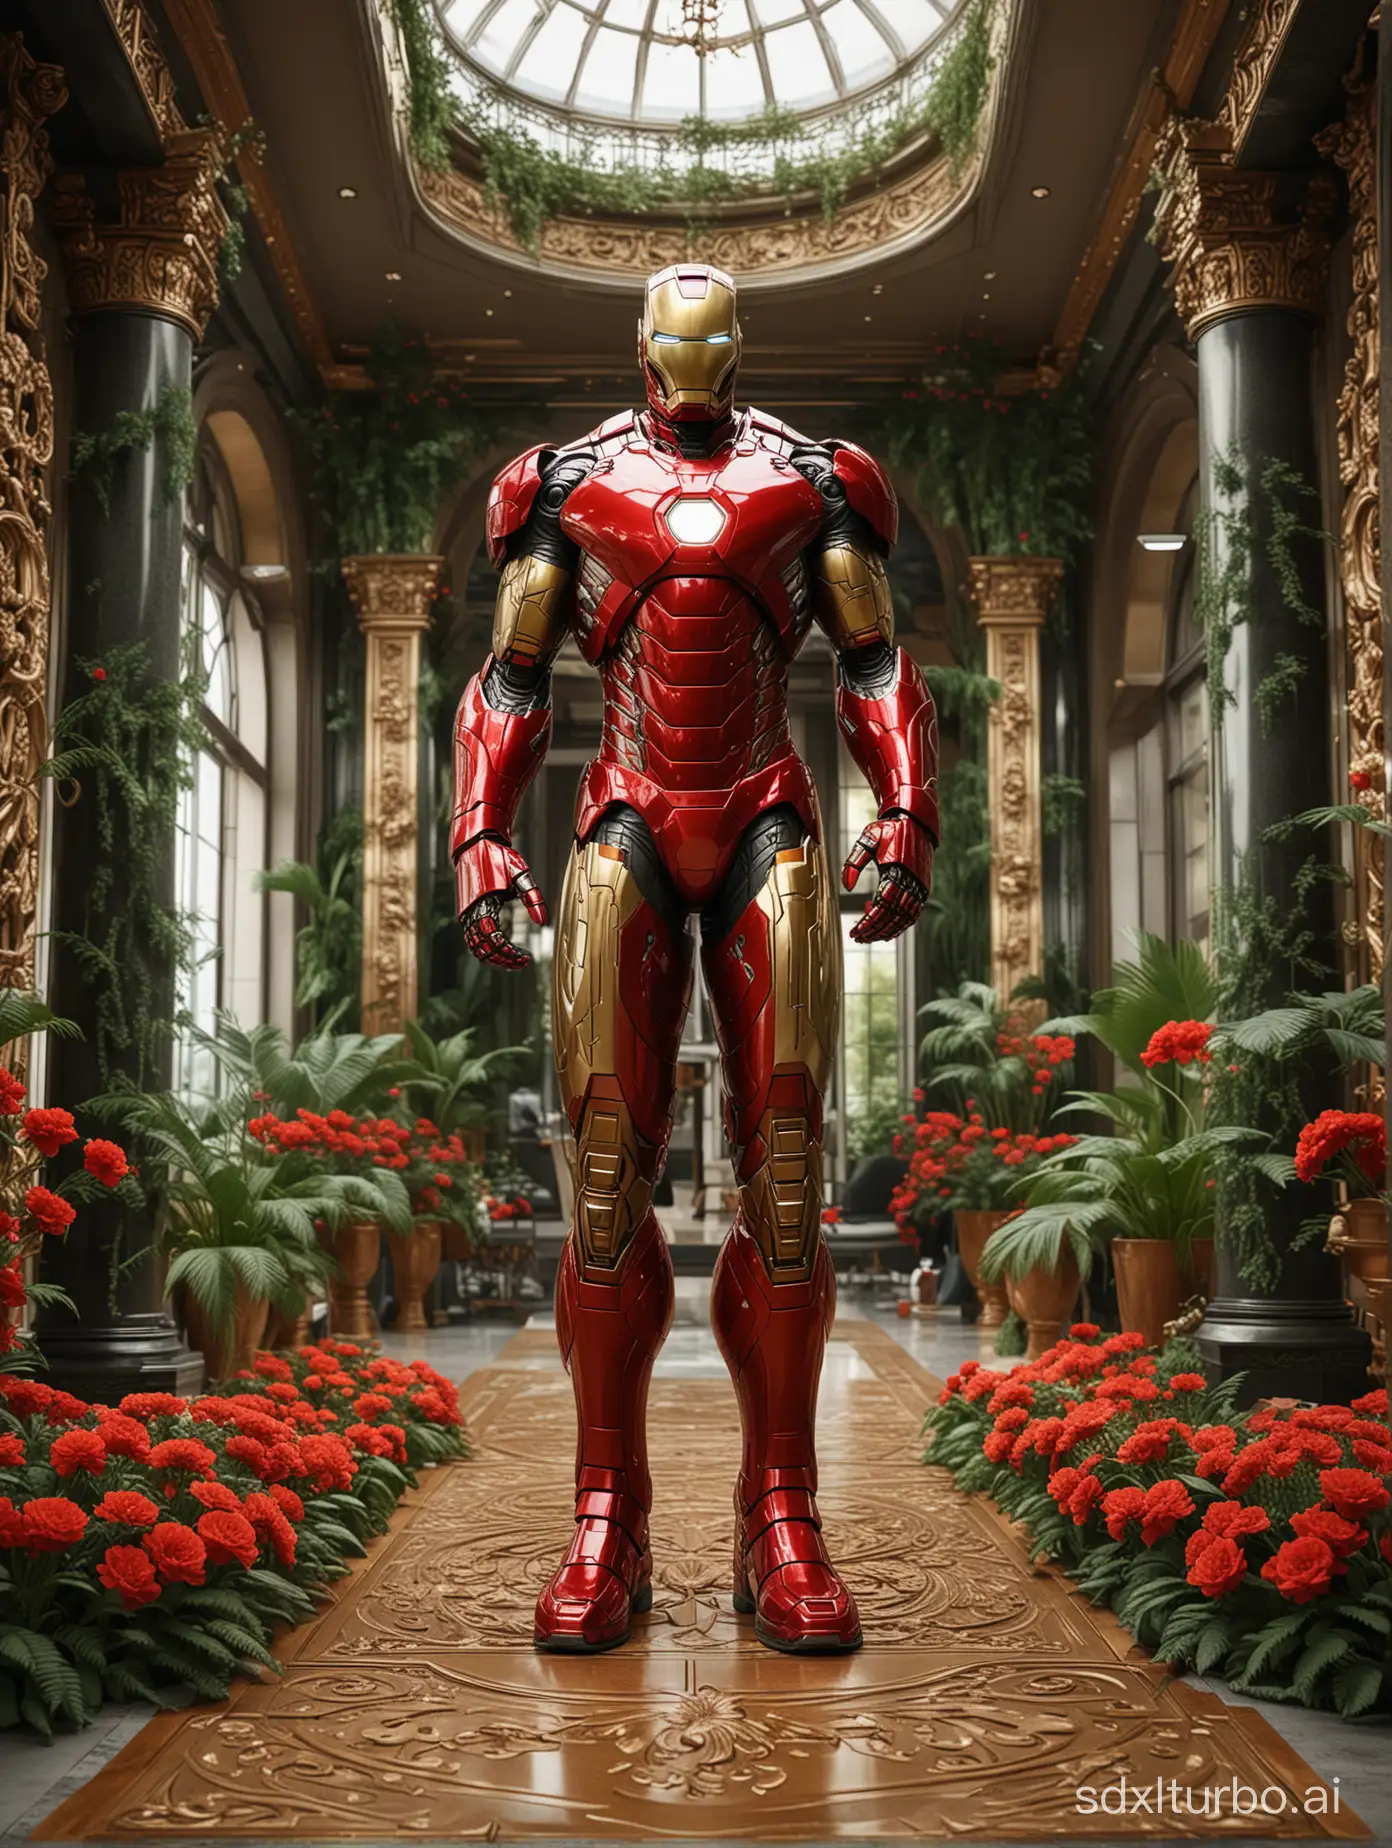 realistic image of a extravagant showroom with Ironman suit, with intricate carvings and intricate details, surrounded by the lush greenery of the landscape, modern, luxurious and exuberant mansion with GOLD details. Red flowers vegetation.